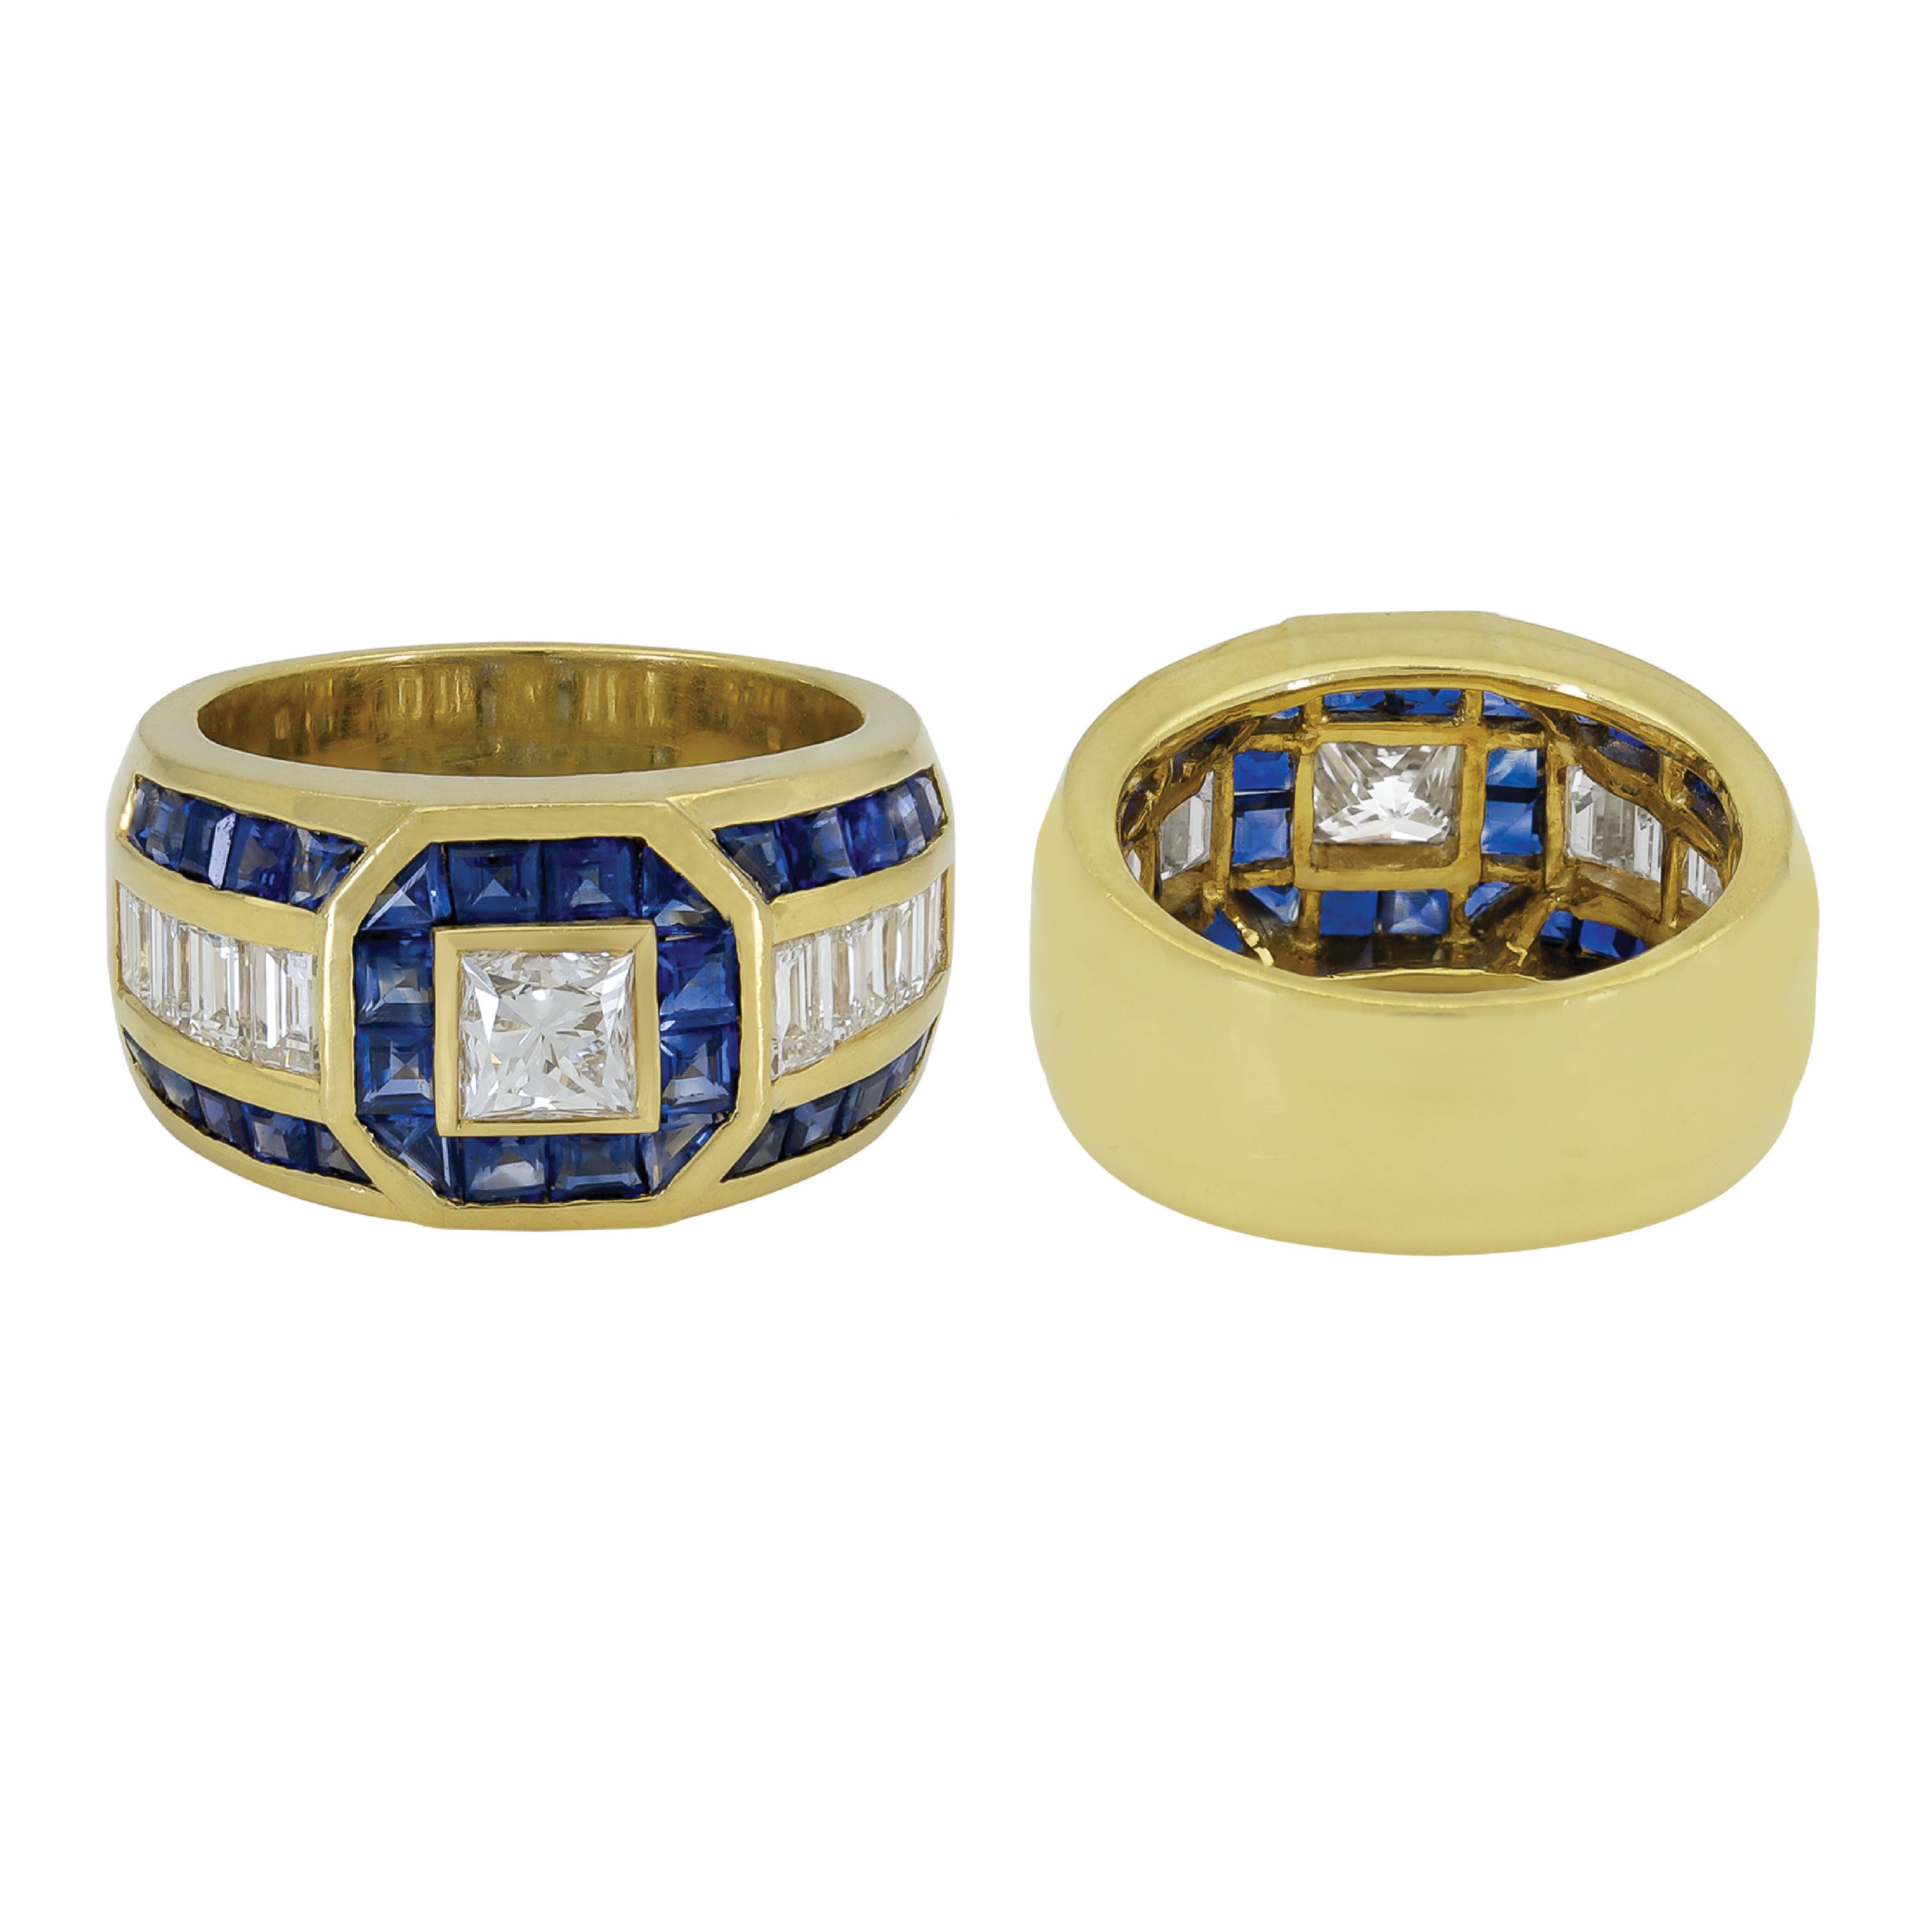 Princess Cut Sophia D. 0.64 Carat Diamond Center with Blue Sapphires Dome Ring in Yellow Gold For Sale